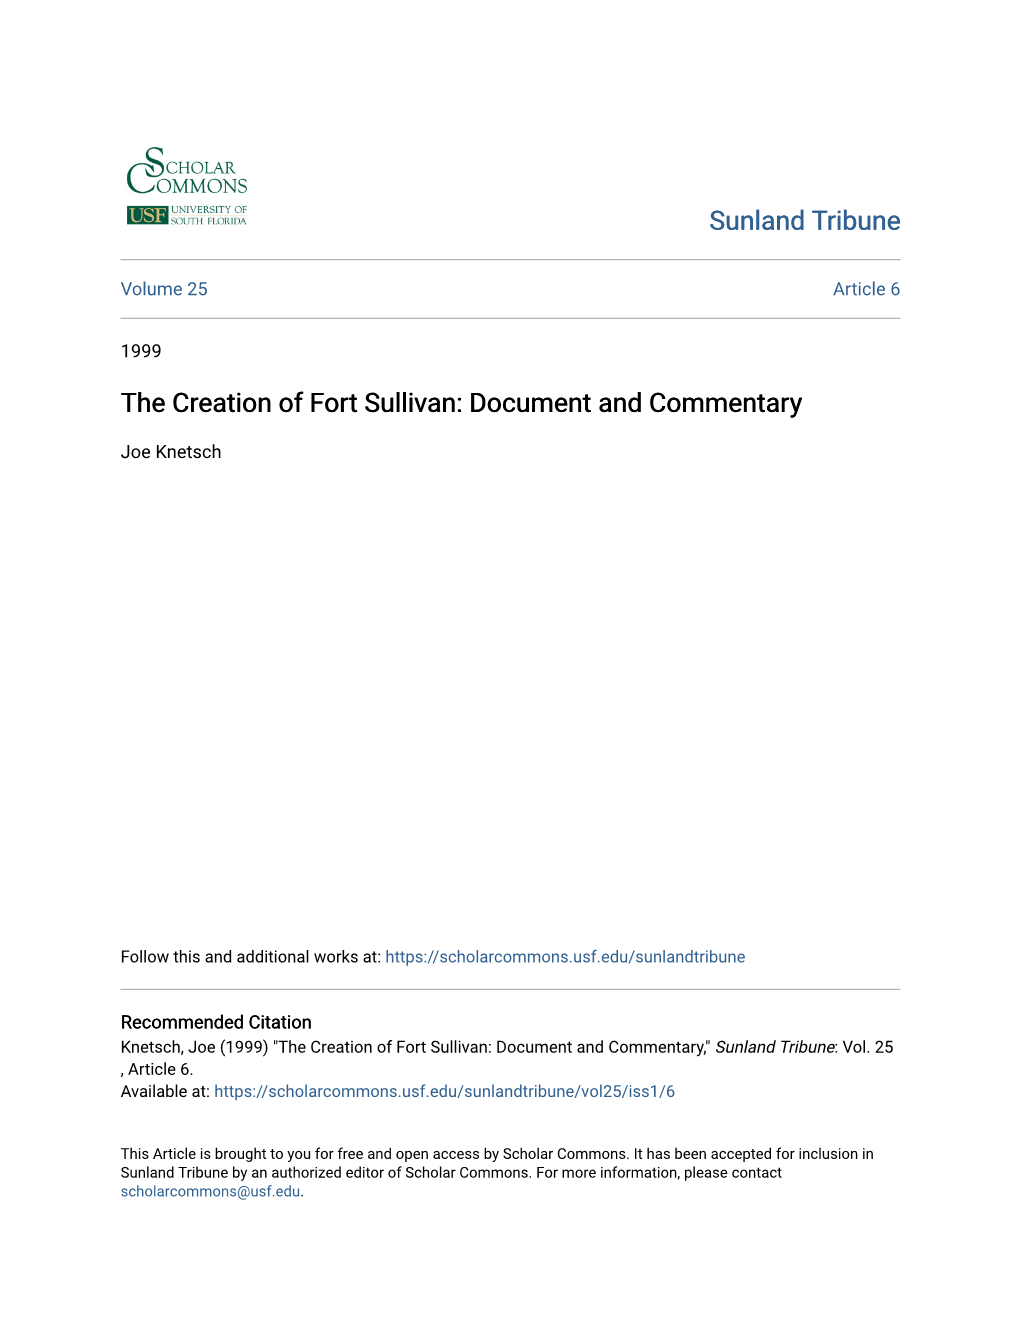 The Creation of Fort Sullivan: Document and Commentary